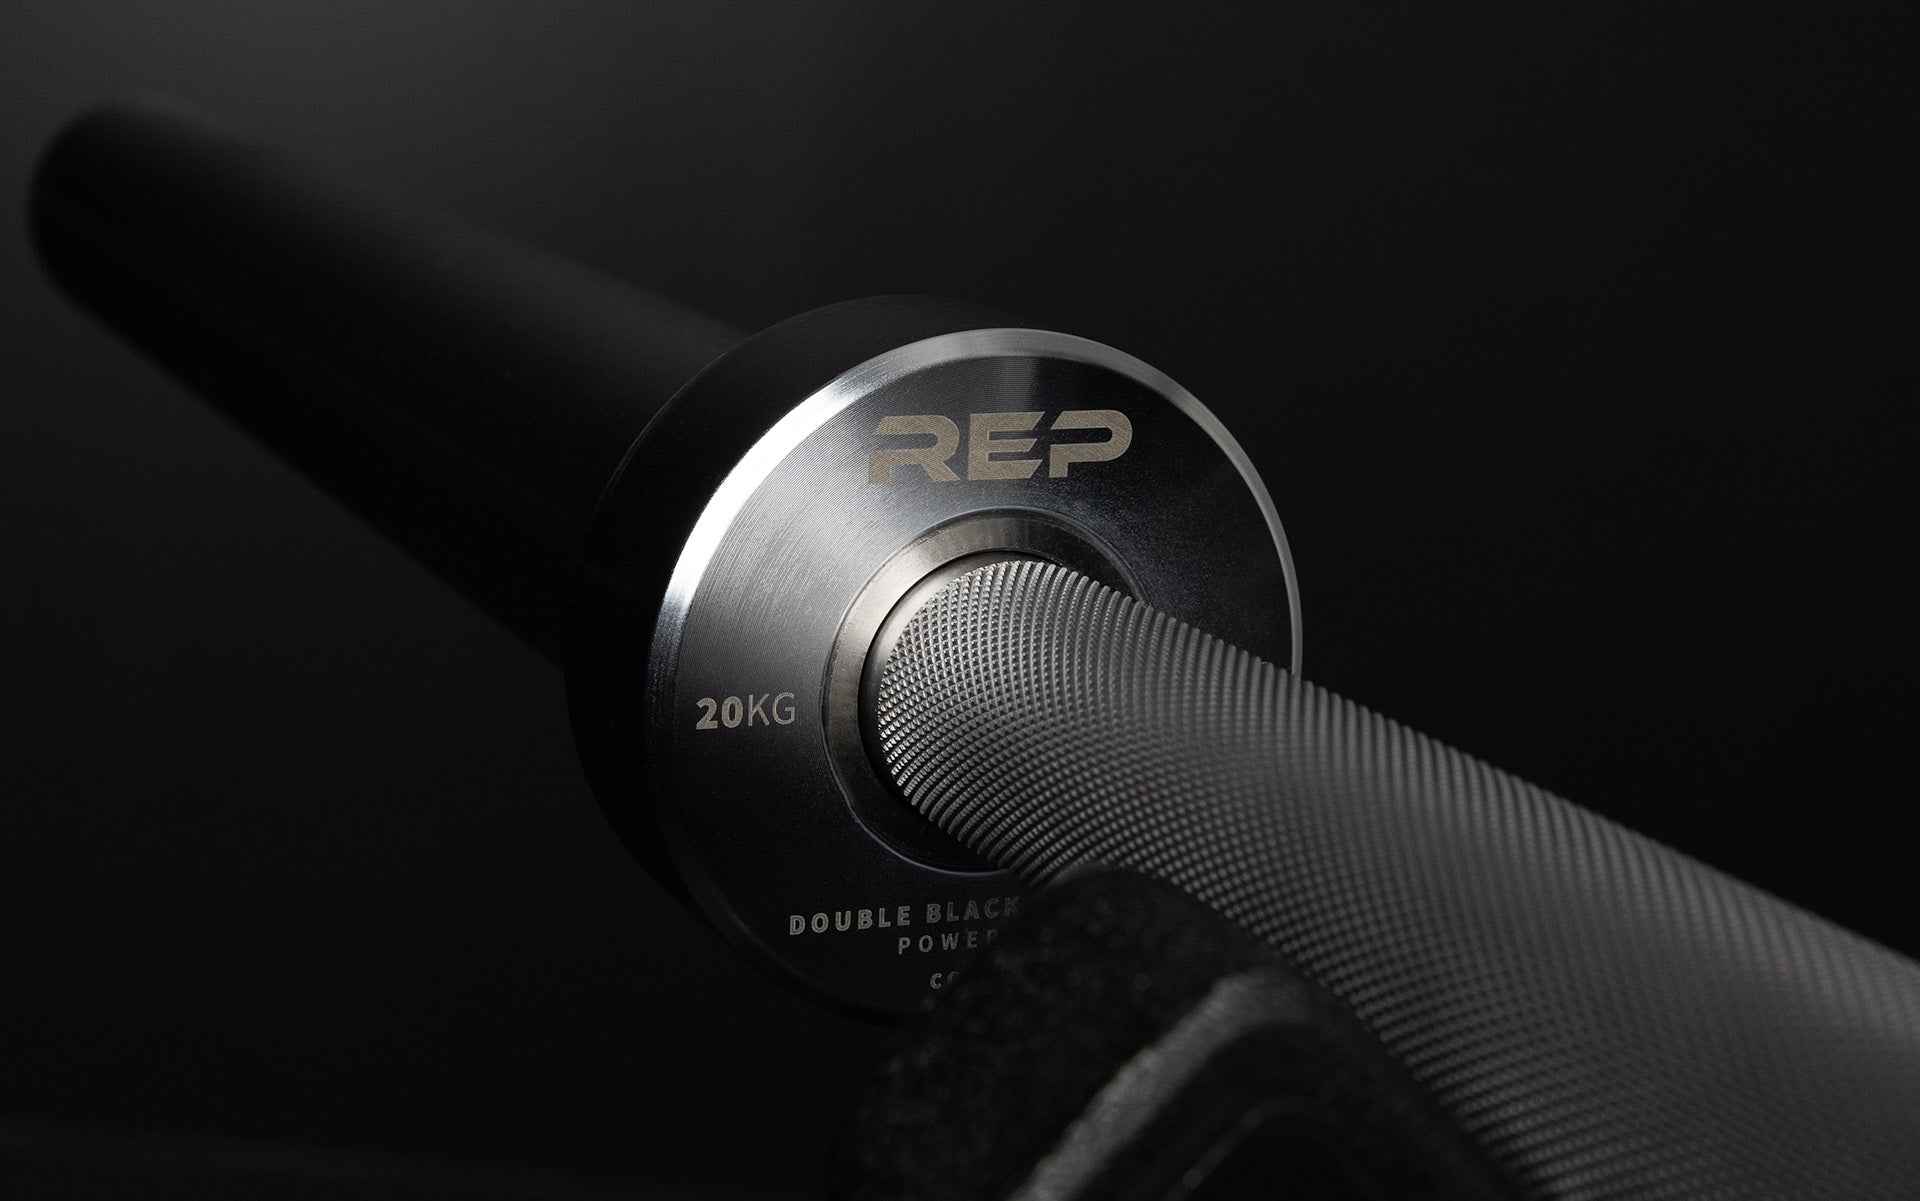 Close-up view of the laser-etched labeling on the inside of the sleeve of a REP Double Black Diamond Power Bar.